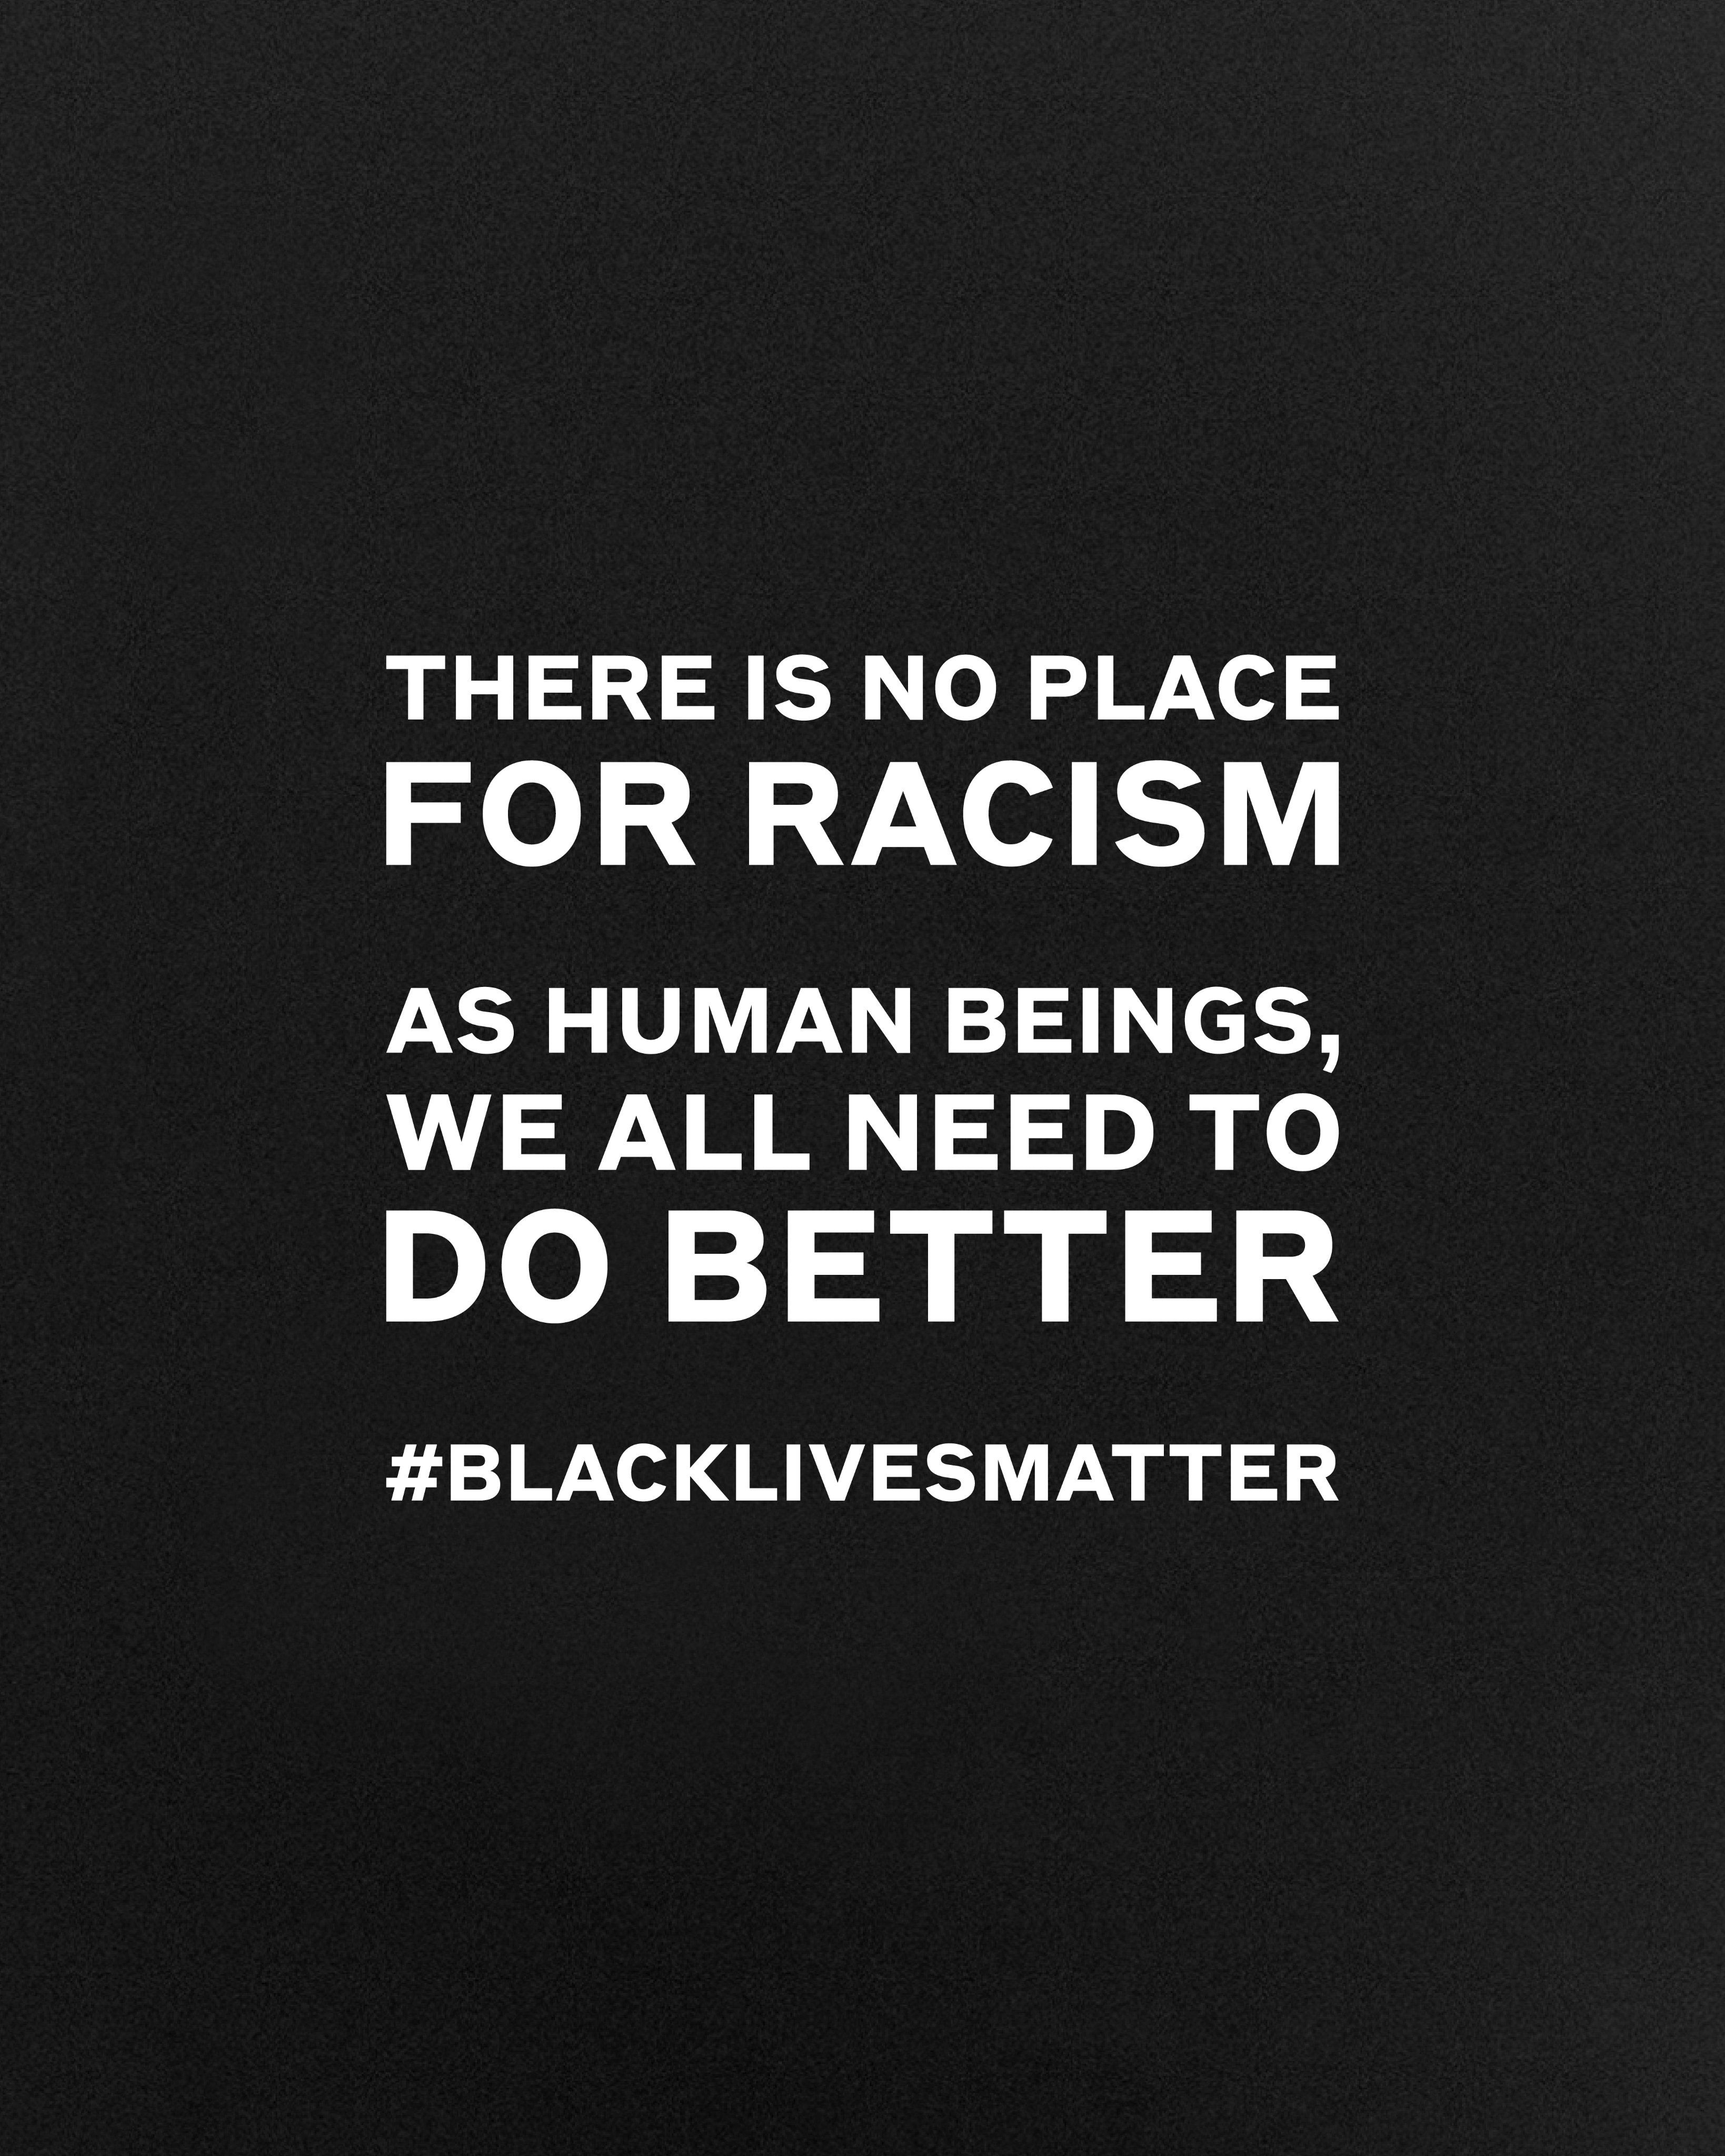 Burberry on Twitter: "There is no place for racism. As human beings, we all need to do better. https://t.co/LjyiWuStVx / Twitter